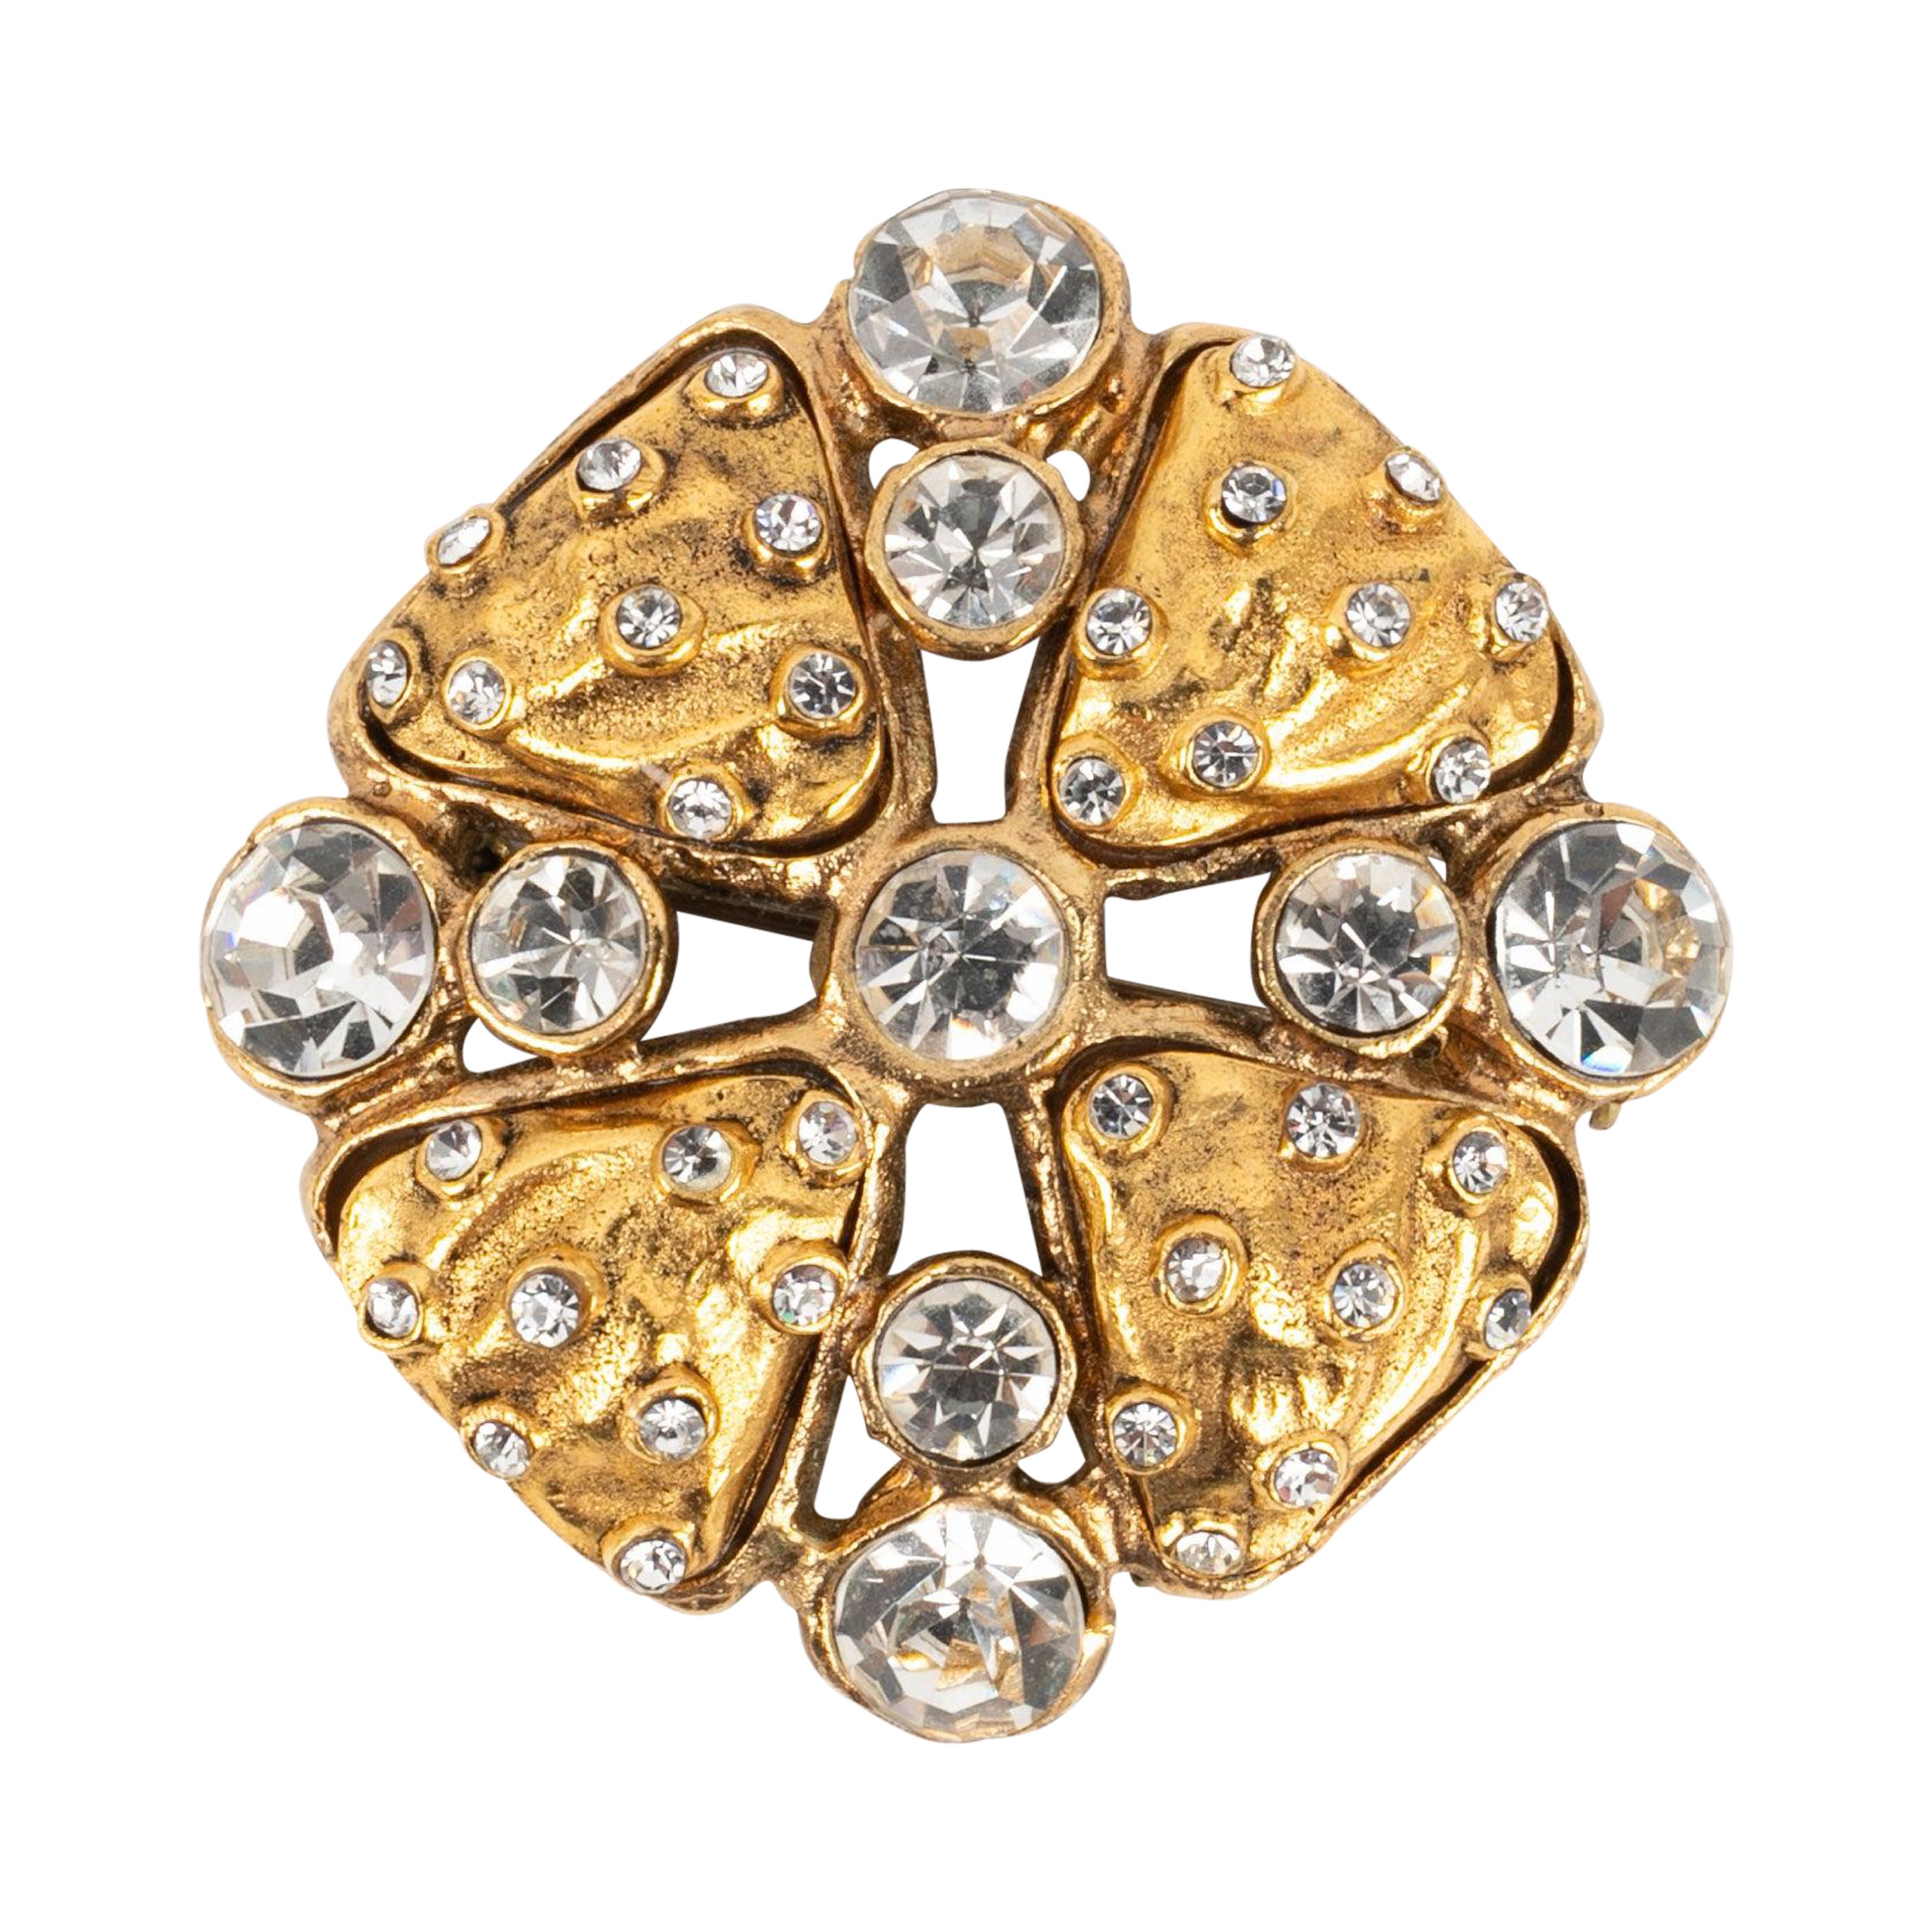 Chanel Byzantine Brooch in Gold-Plated Metal, 1990s For Sale